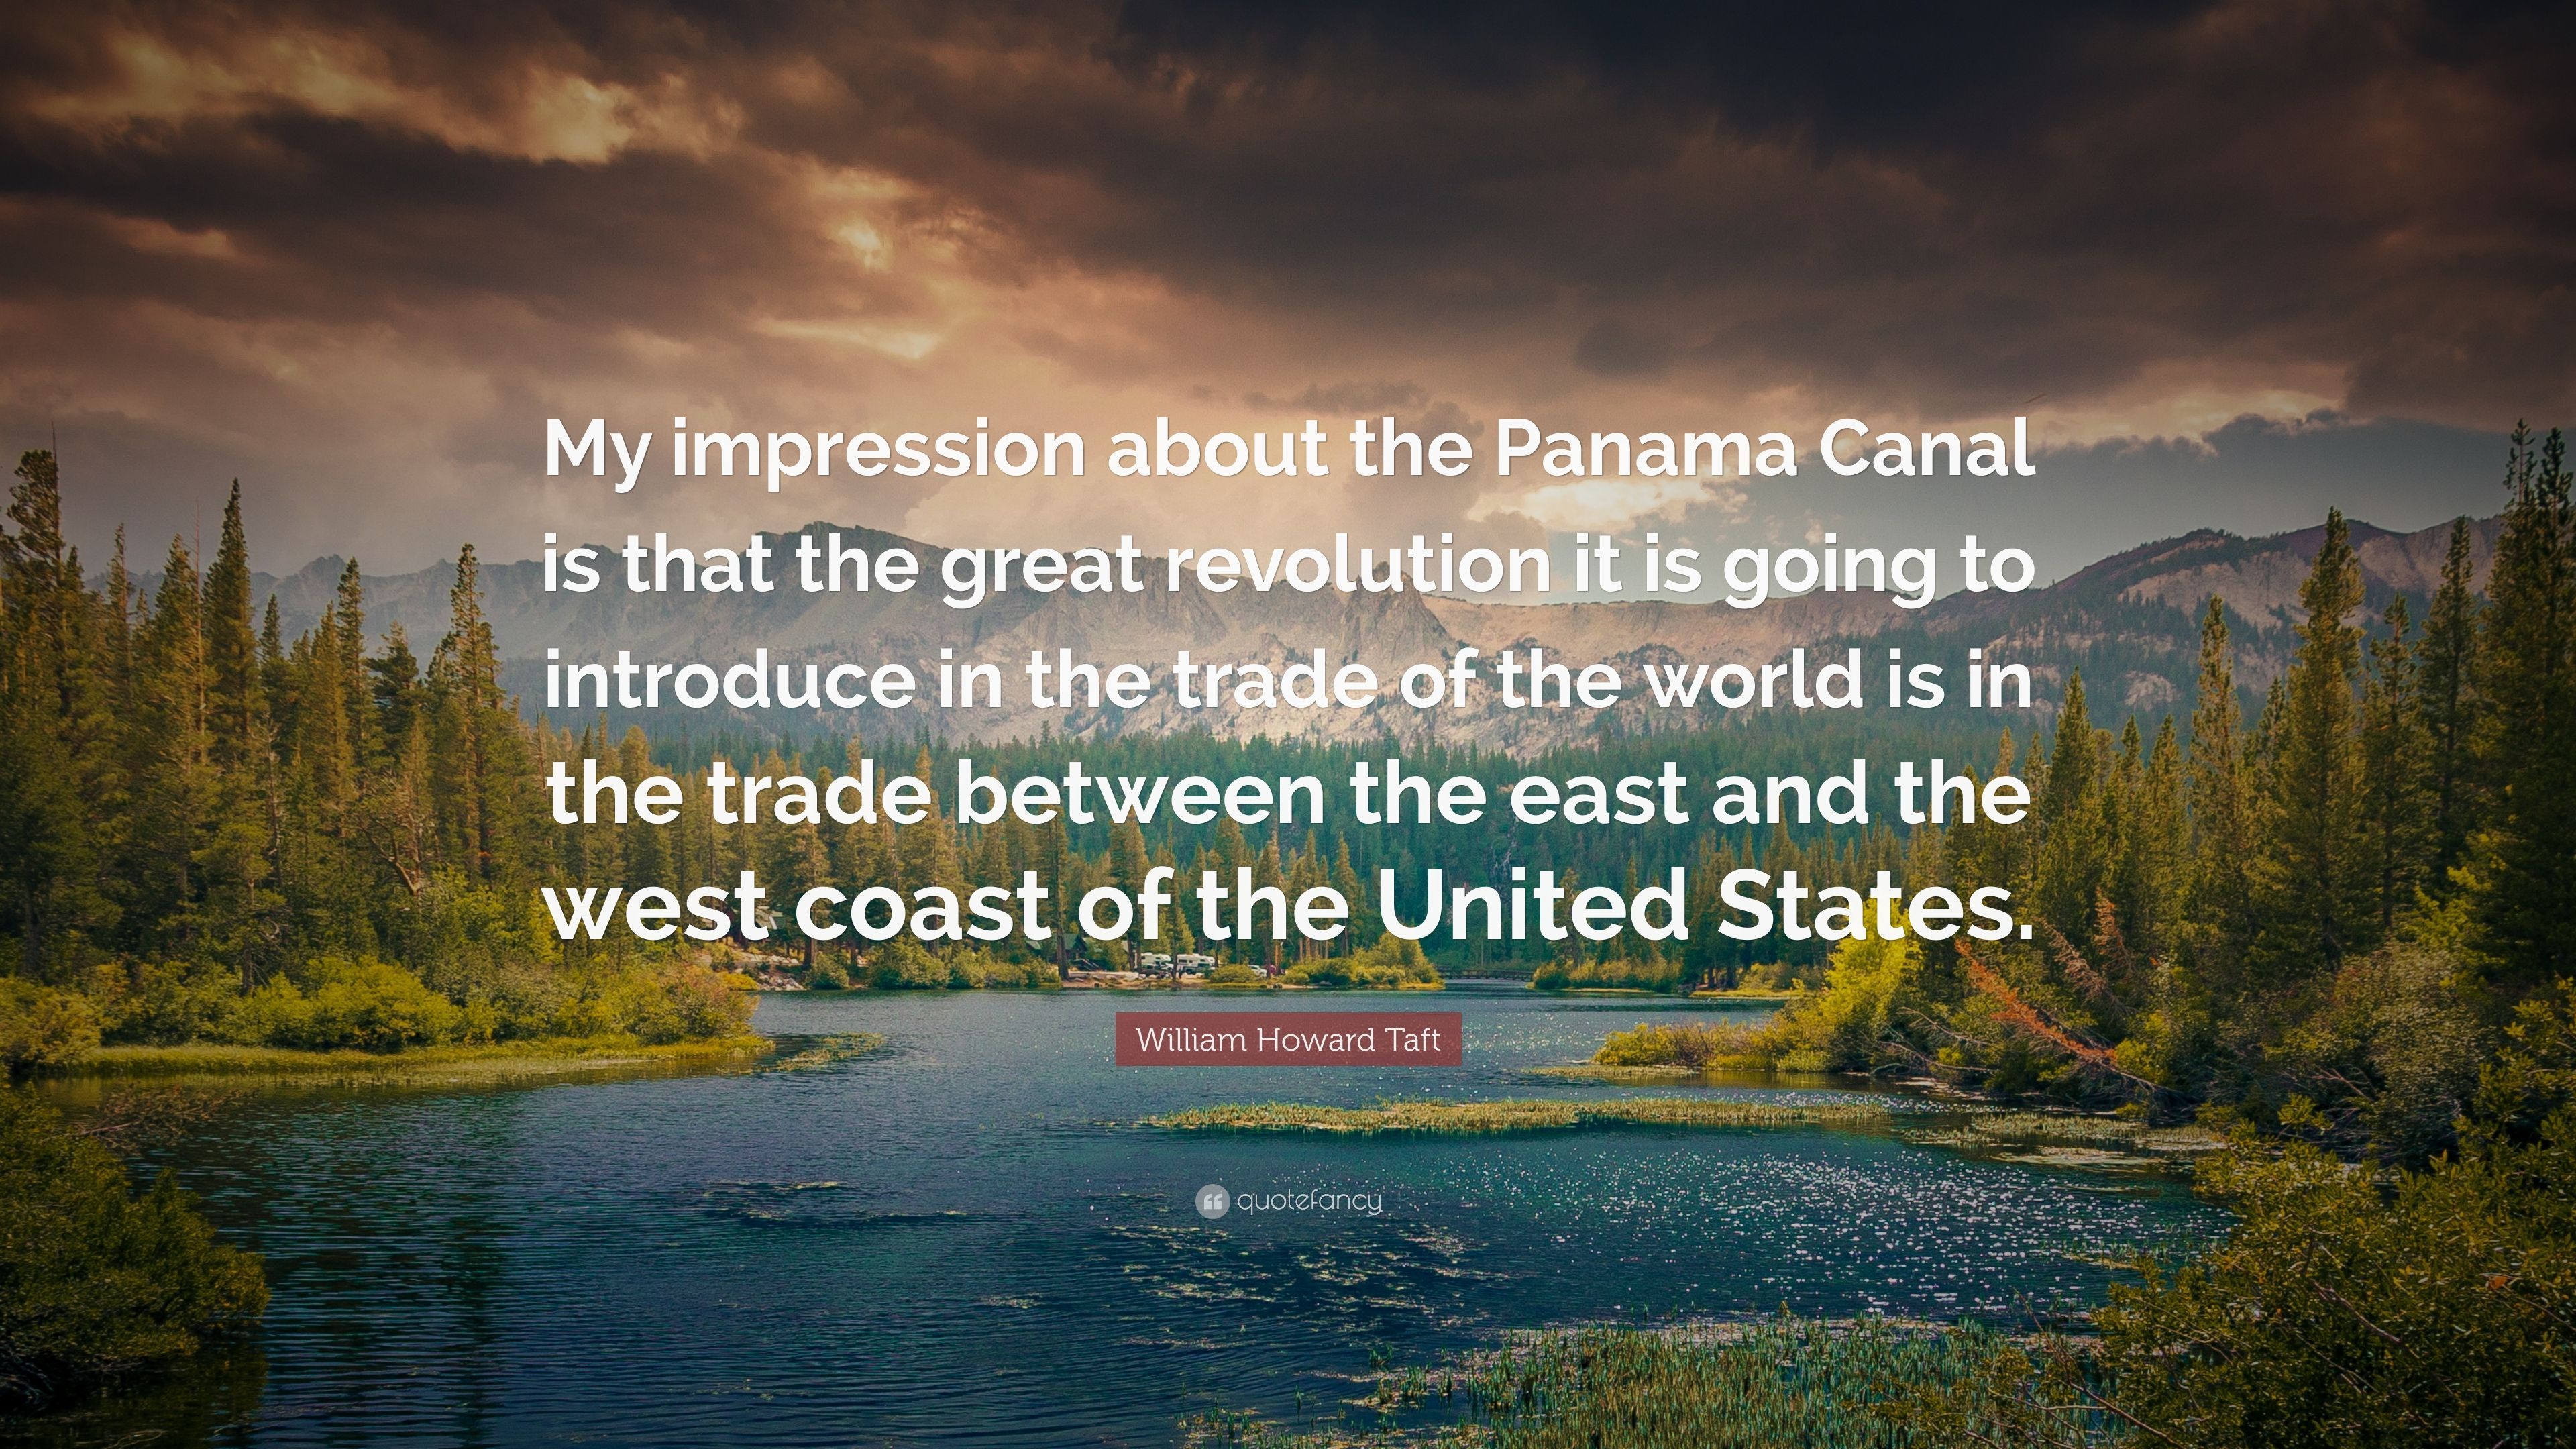 William Howard Taft Quote: “My impression about the Panama Canal